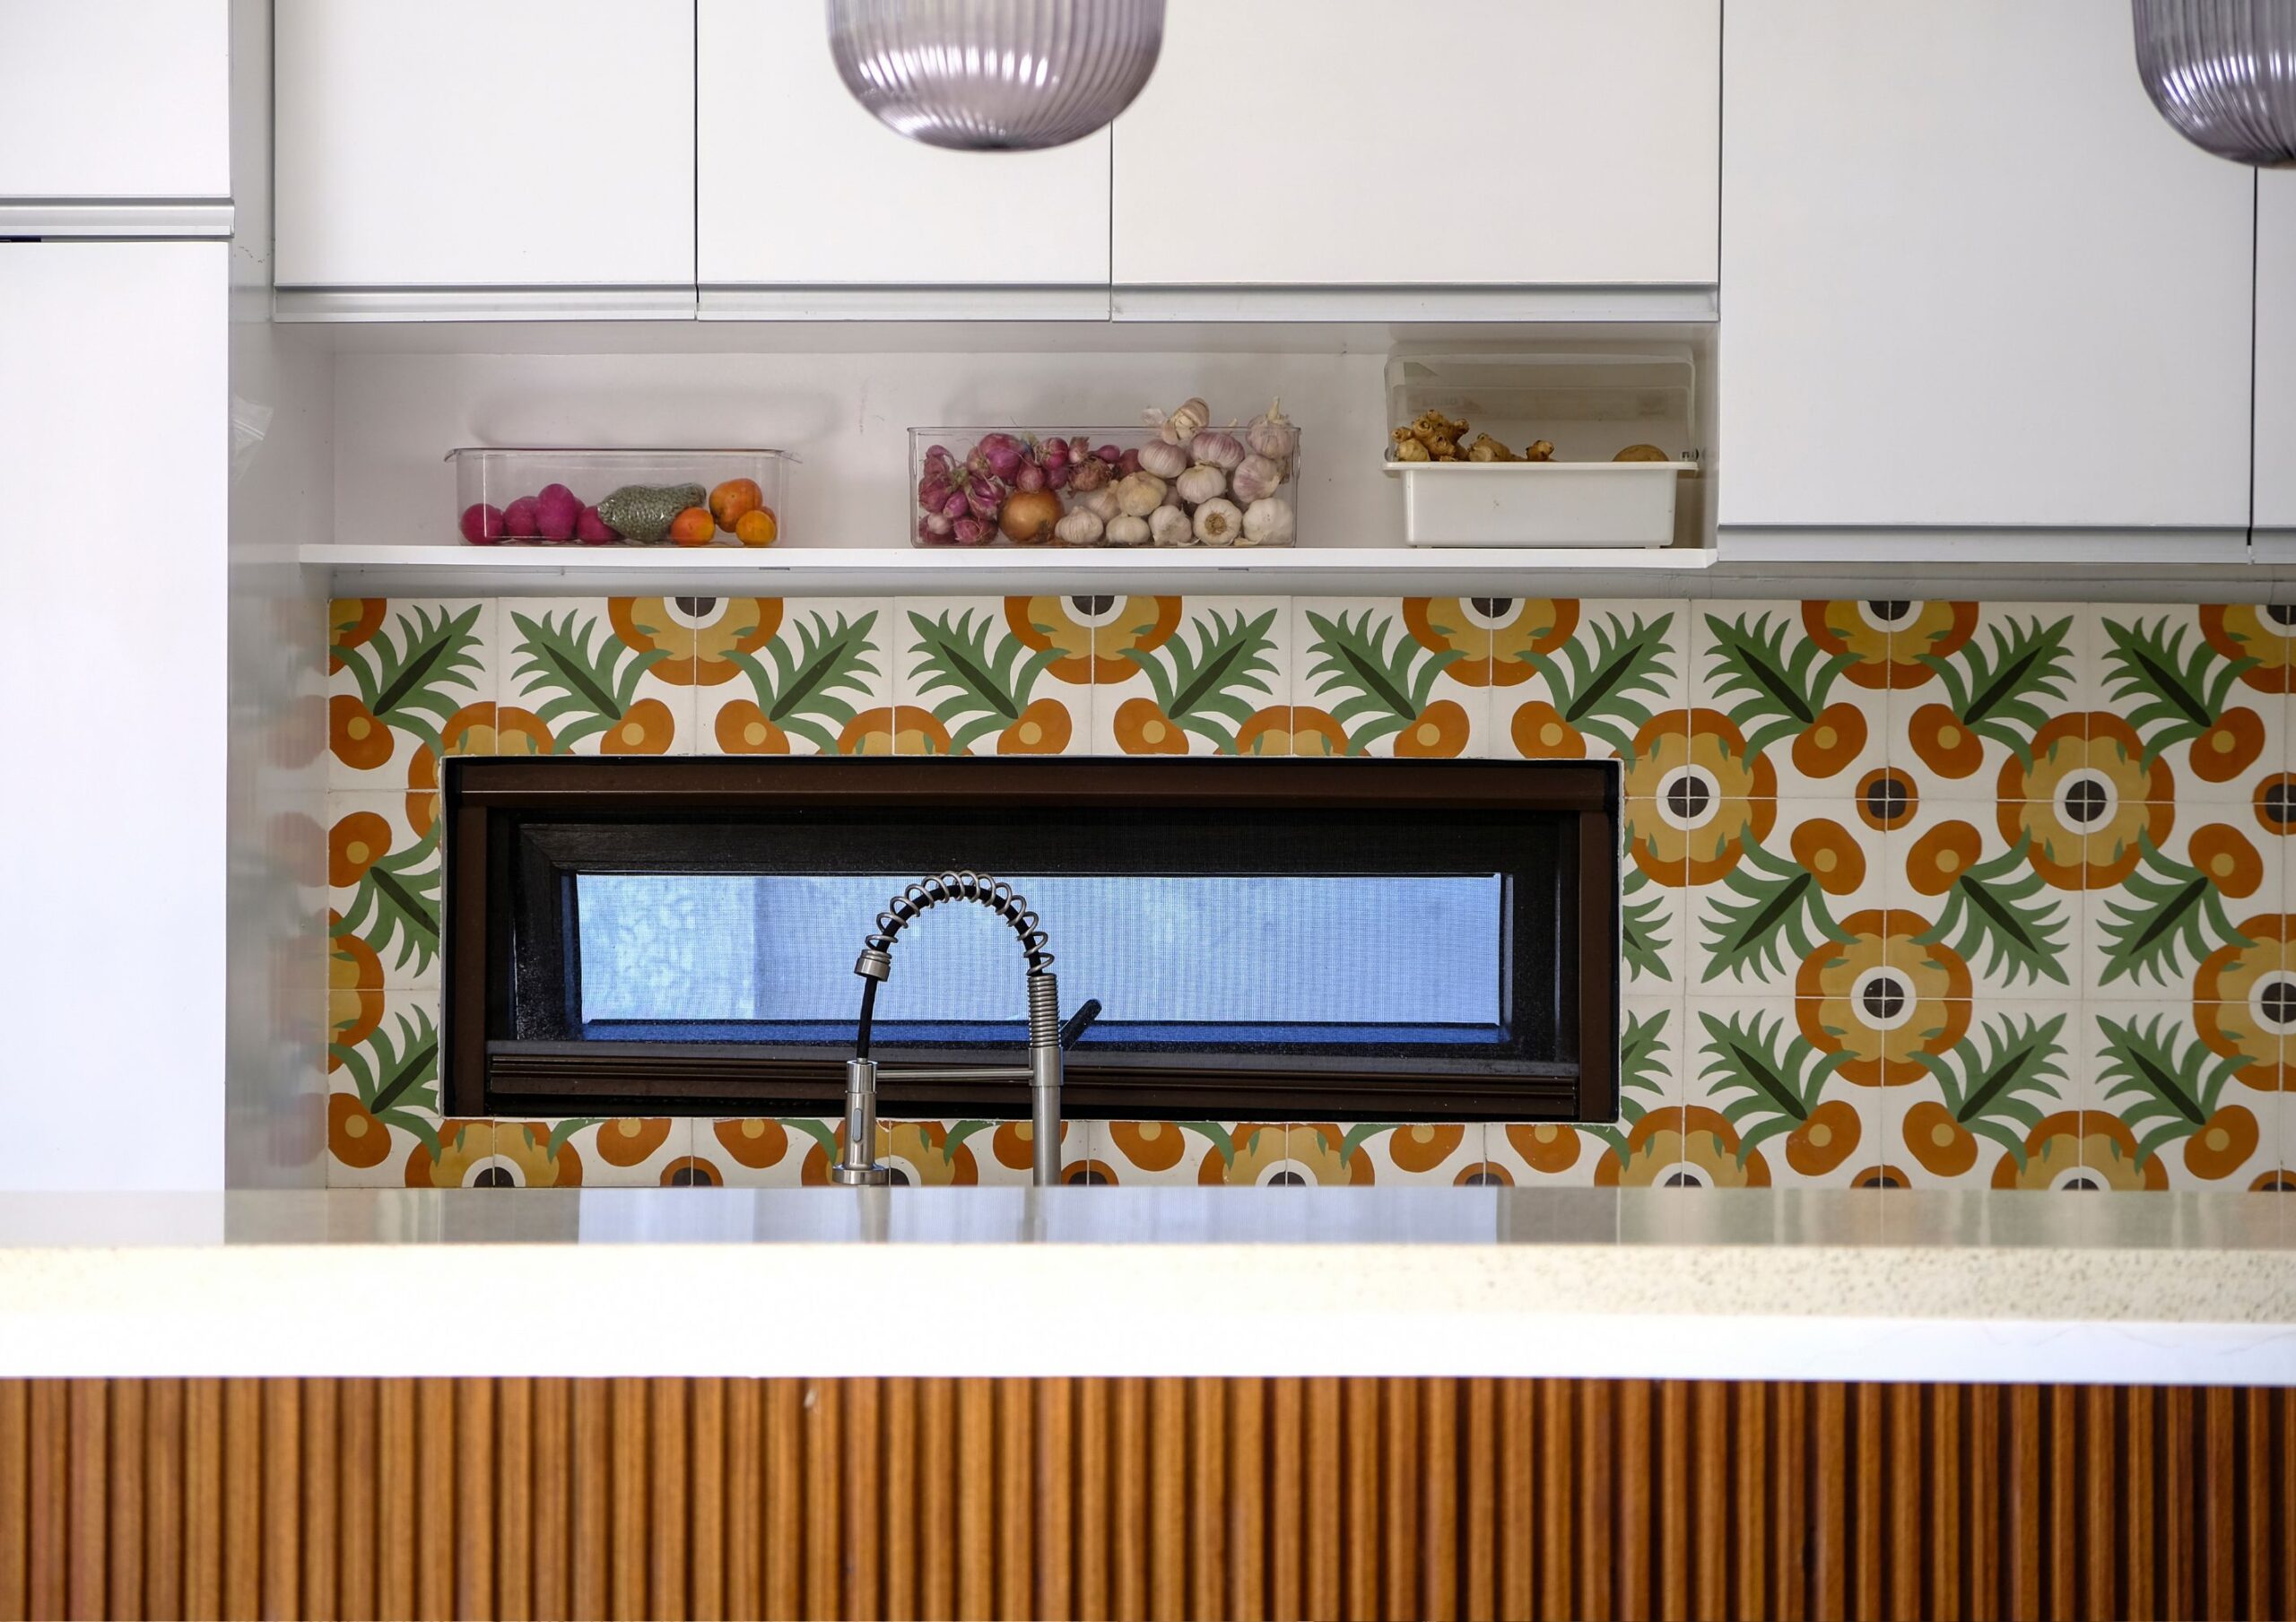 a modern kitchen with colorful patterned tiles, a small window, and kitchen island.